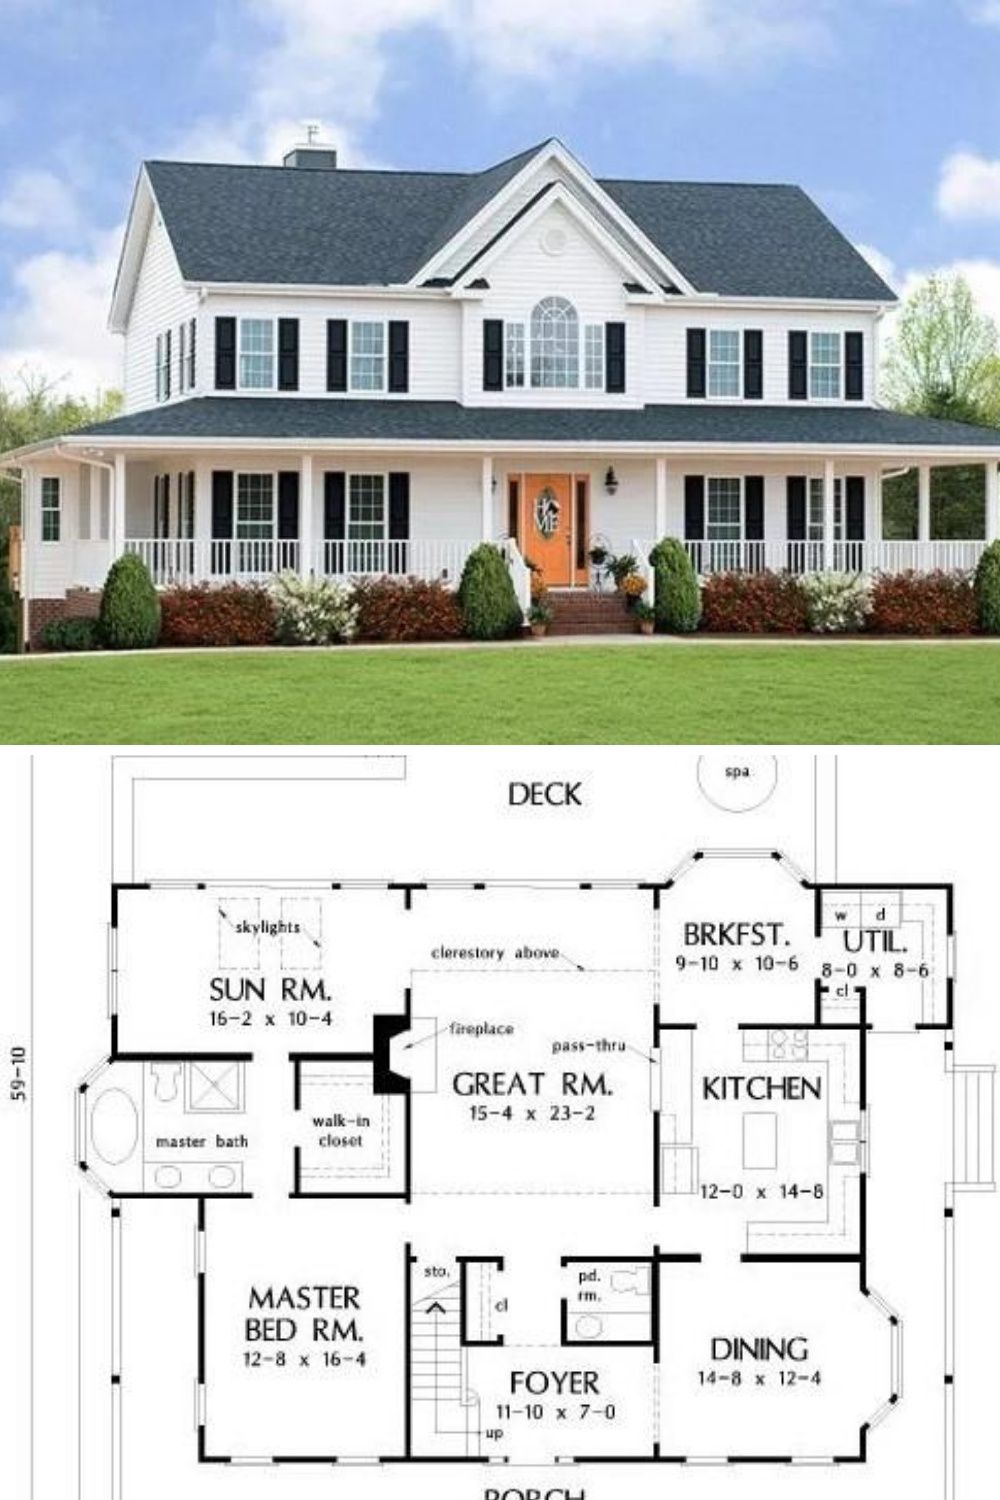 2Story 4Bedroom The Riverbend Farmhouse House Plan with